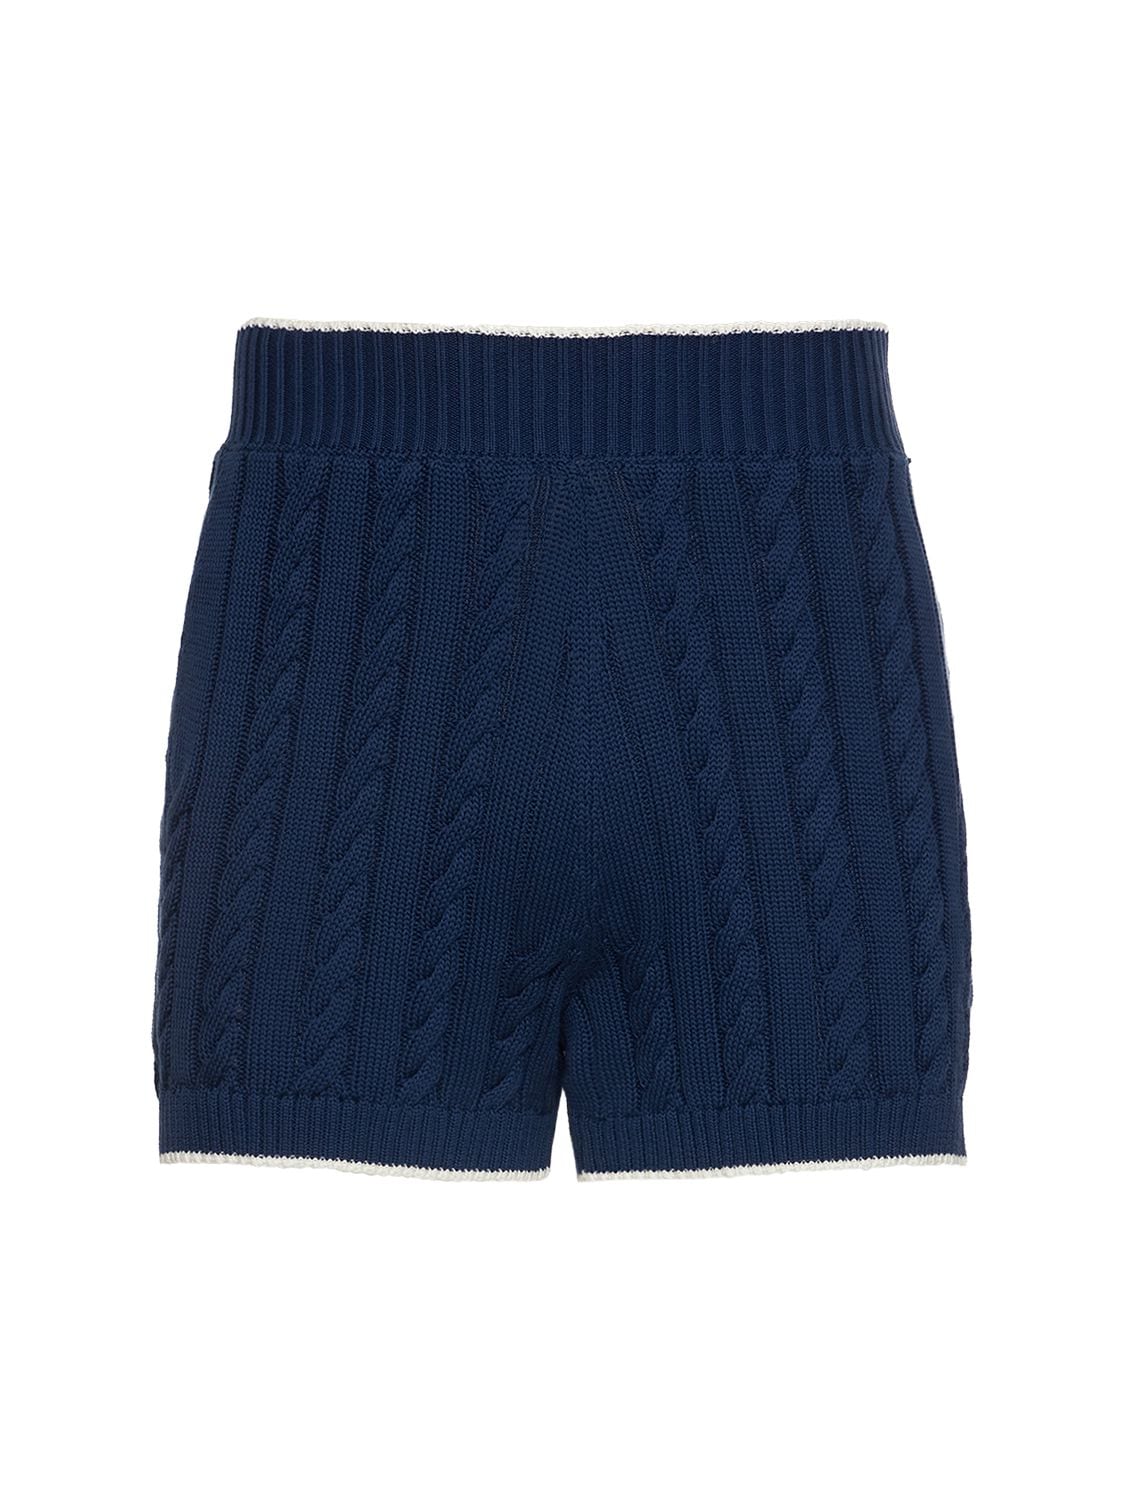 Image of Cotton Knit Bunny Shorts